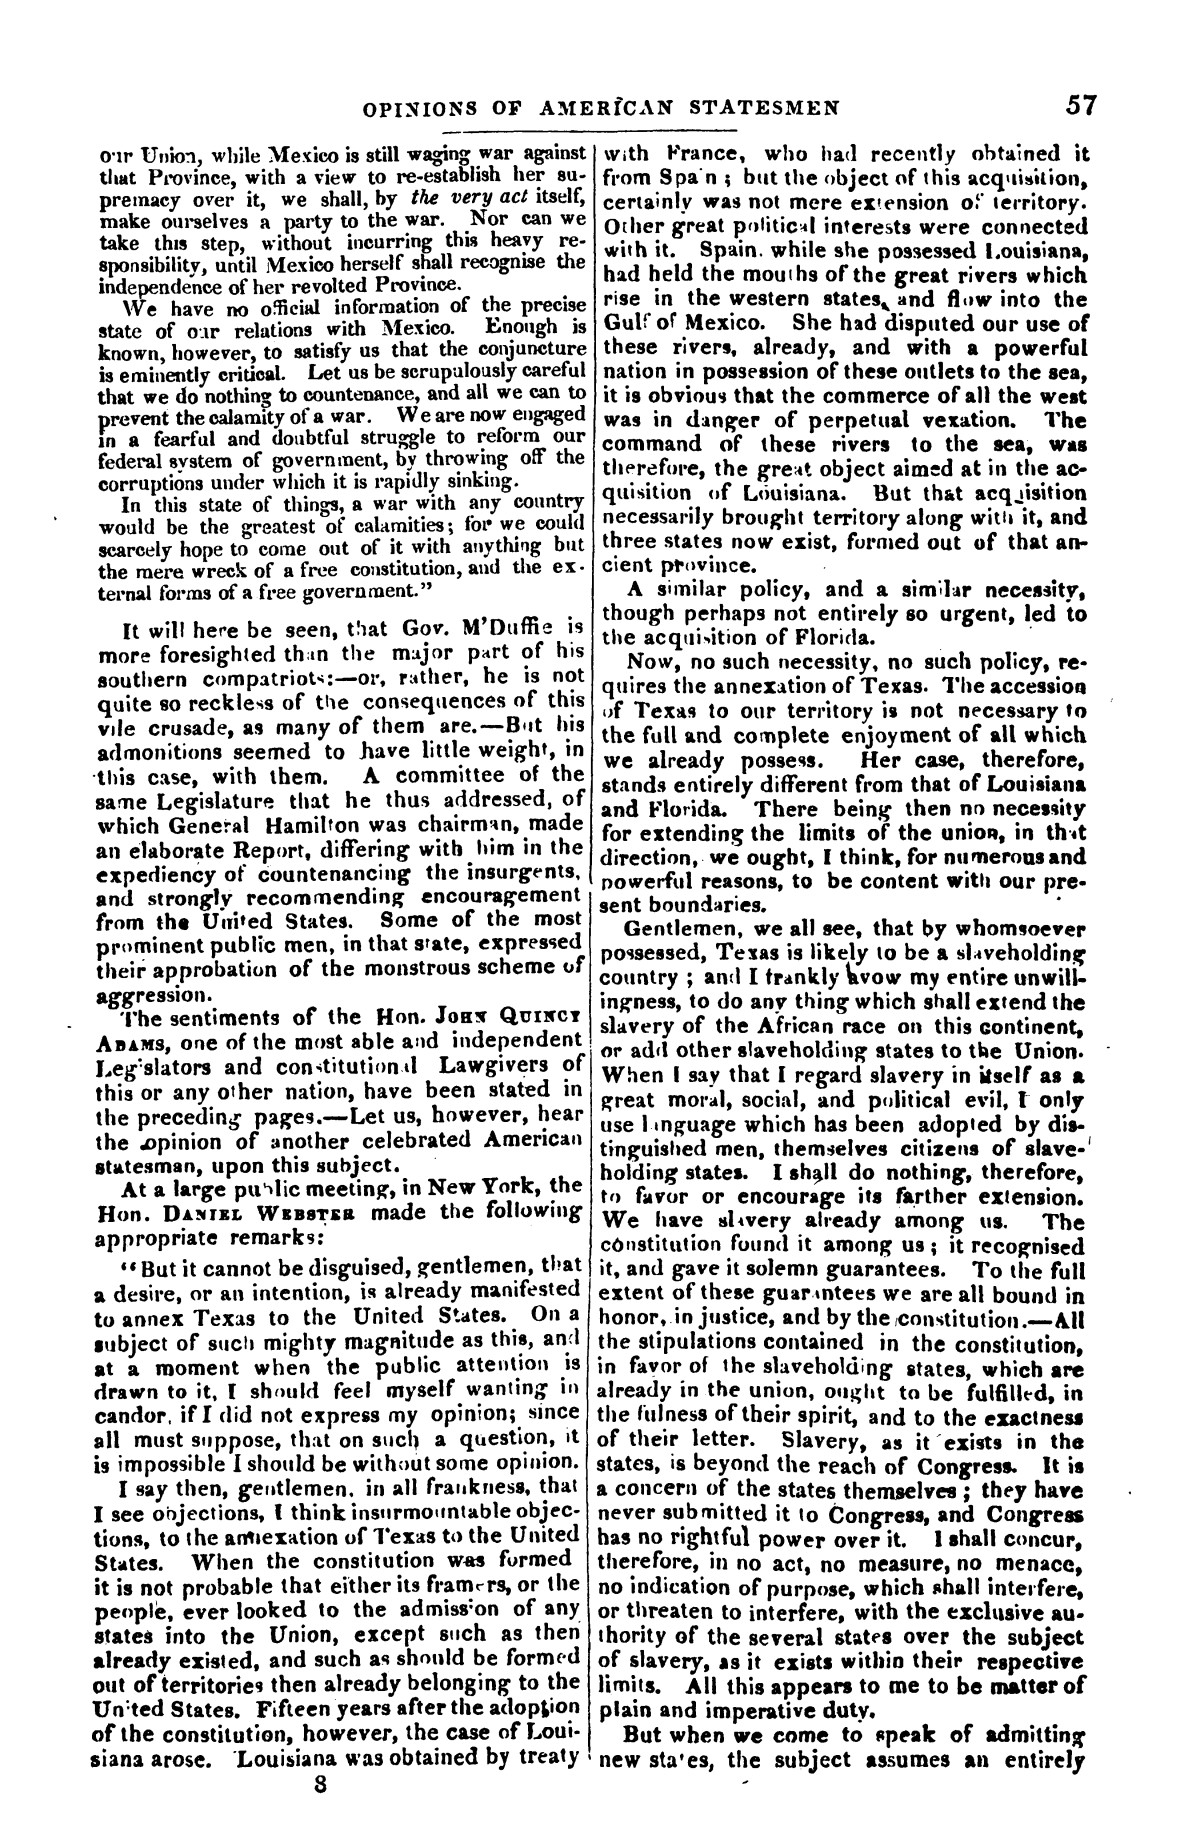 The War in Texas; A Review of Facts and Circumstances, showing that this contest is a Crusade Against Mexico, set on foot by Slaveholders, Land Speculators, &c. In Order to Re-Establish, Extend, and Perpetuate the System of Slavery and the Slave Trade.
                                                
                                                    [Sequence #]: 57 of 64
                                                